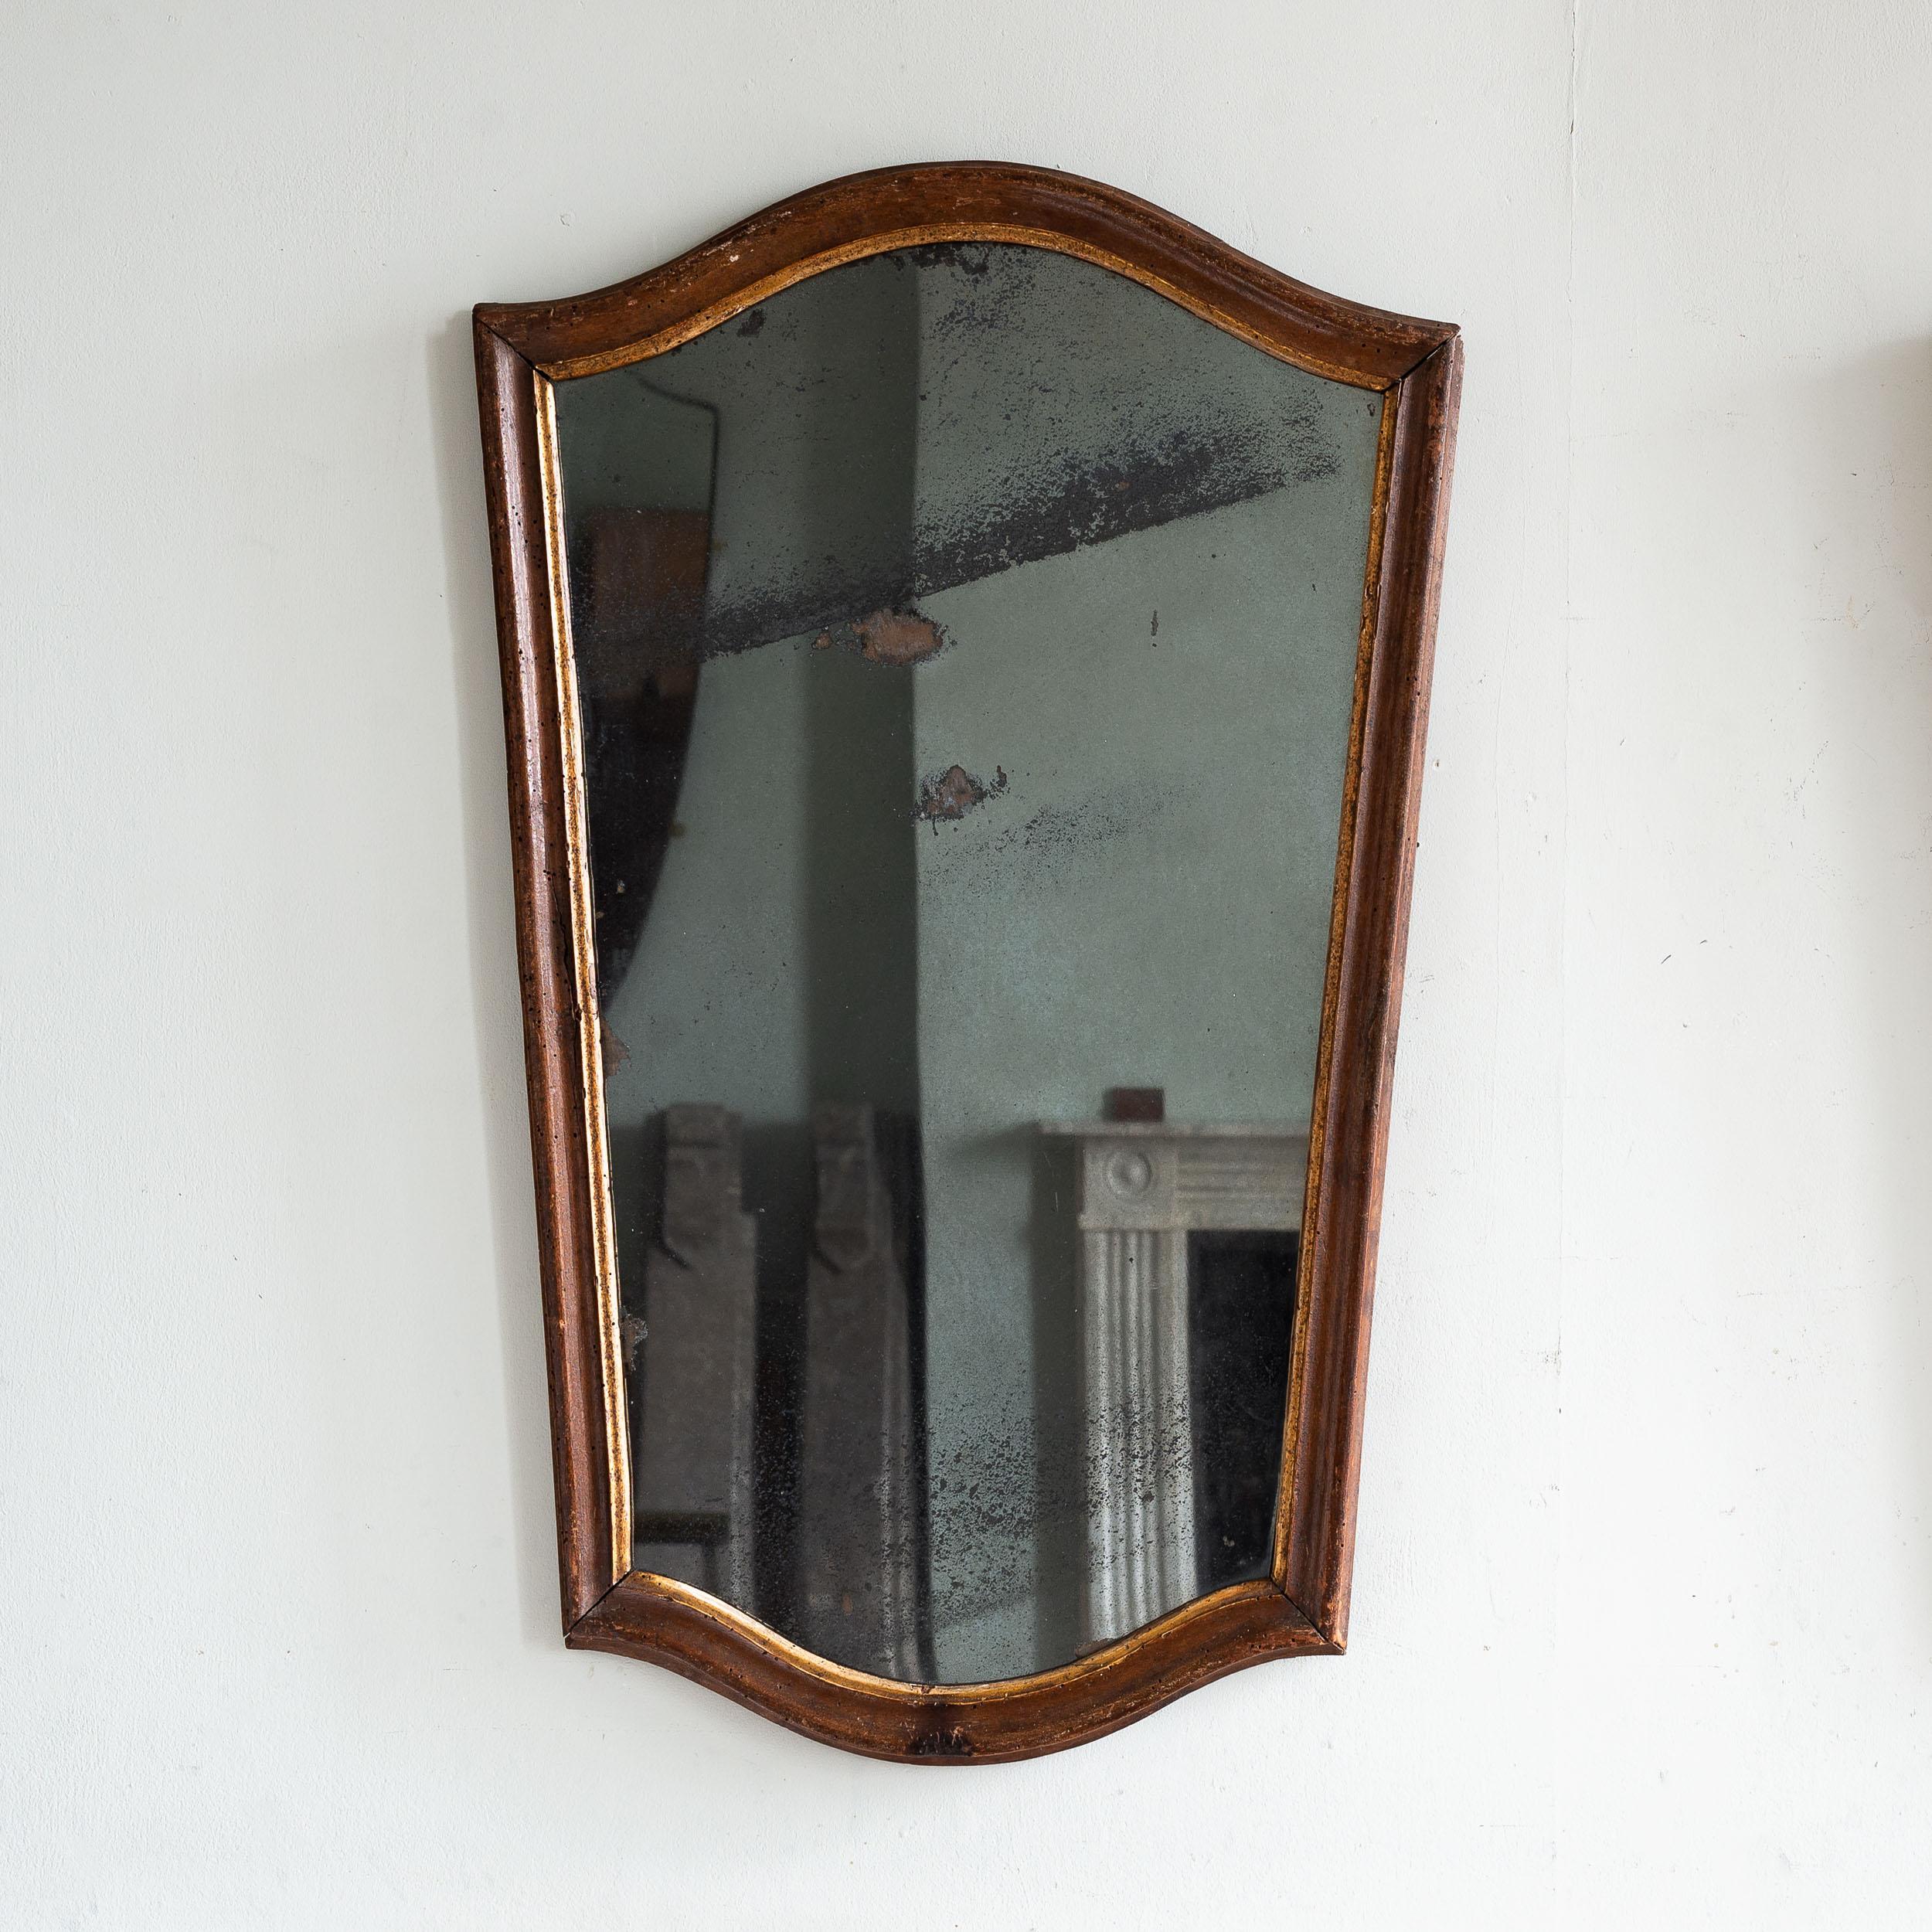 Pair of 18th century Italian Walnut wall mirrors, with gilding to the interior moulding surrounding the attractively foxed mercury mirror plates. Of striking and elegant tapered form, in usable condition showing sign of old (non-active) wood-worm